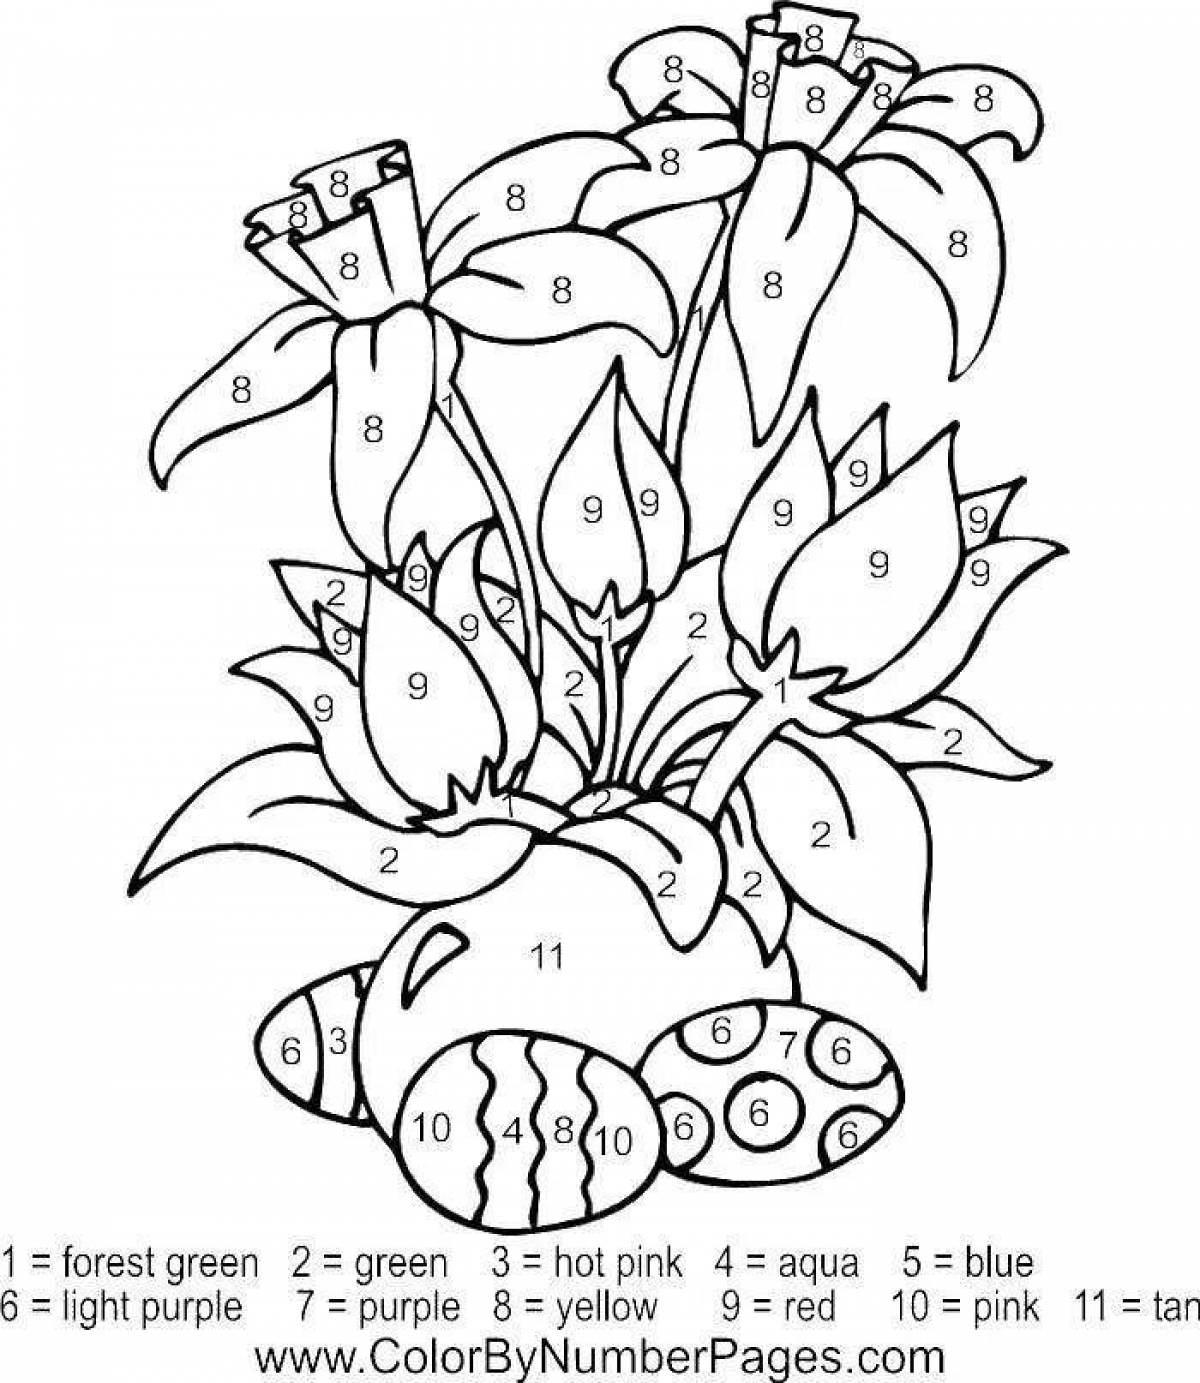 Great coloring flowers by numbers